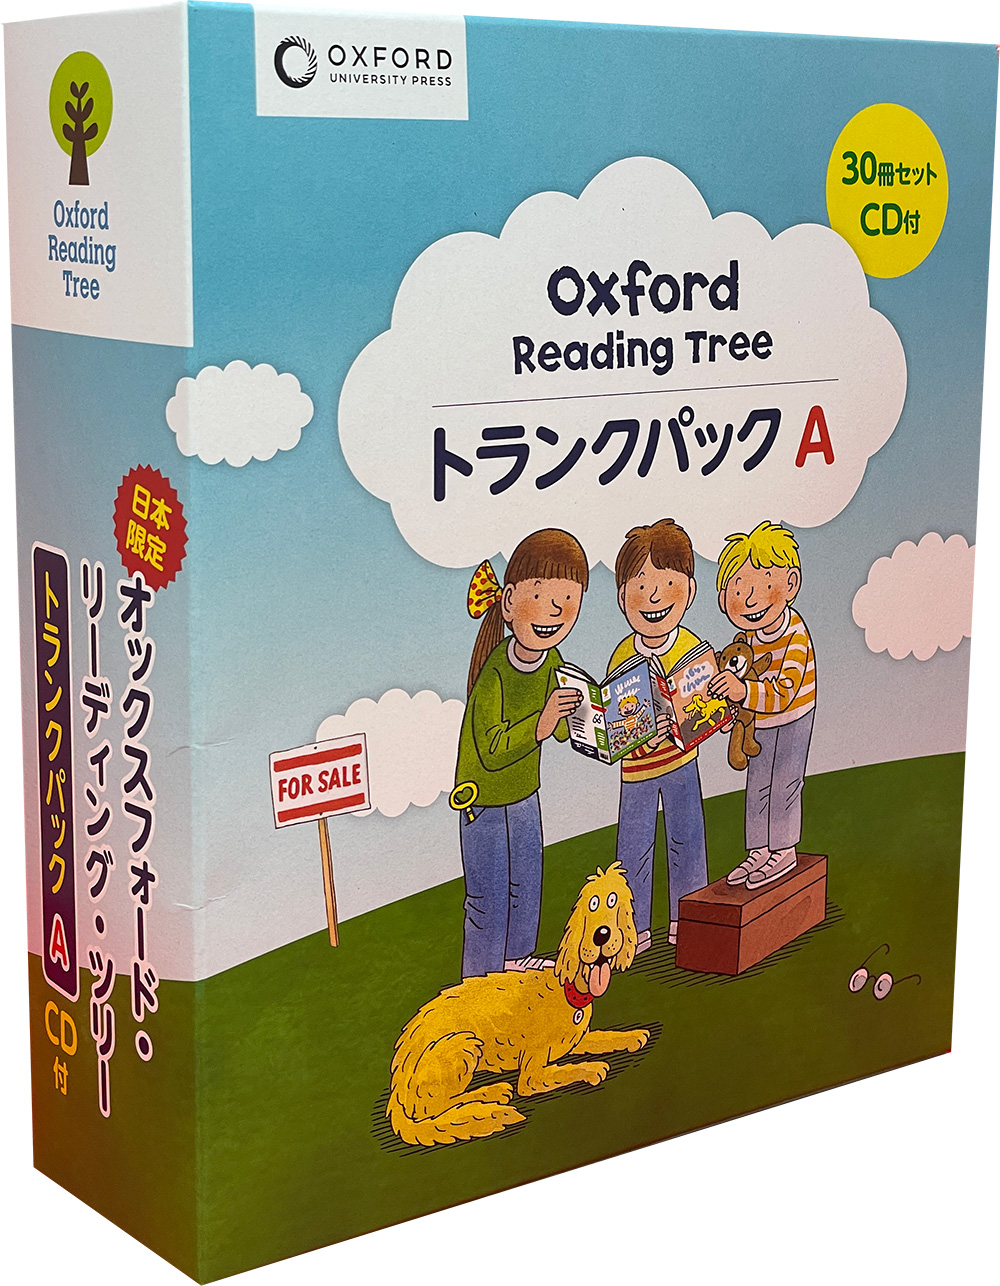 Oxford Reading Tree: Special Packs by Various on ELTBOOKS - 20% OFF!